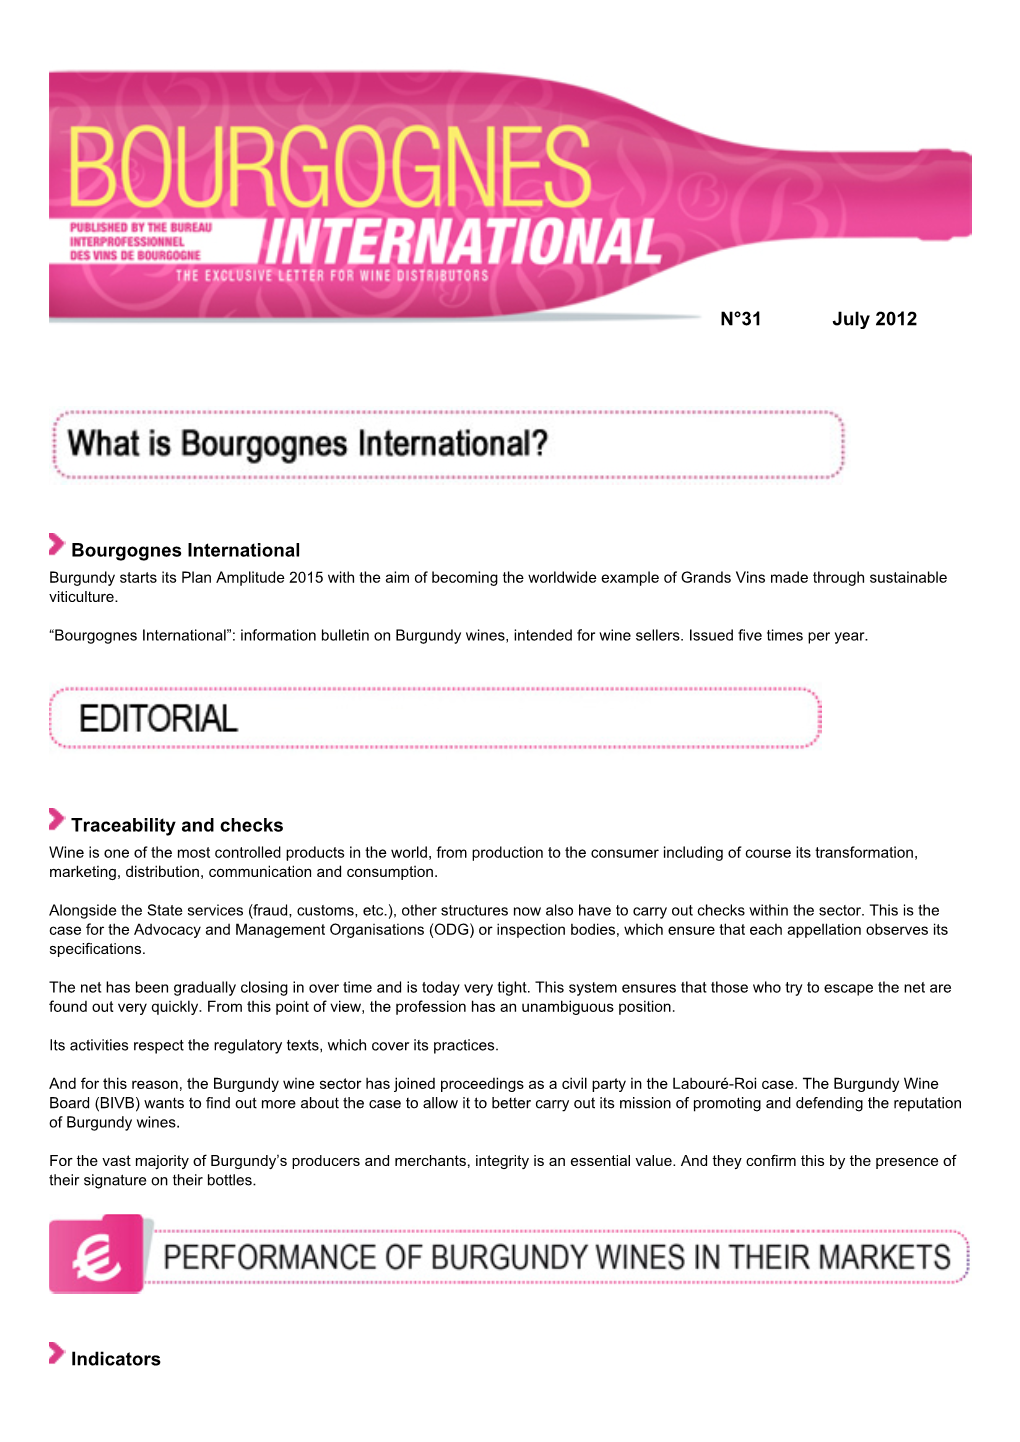 N°31 July 2012 Bourgognes International Traceability And